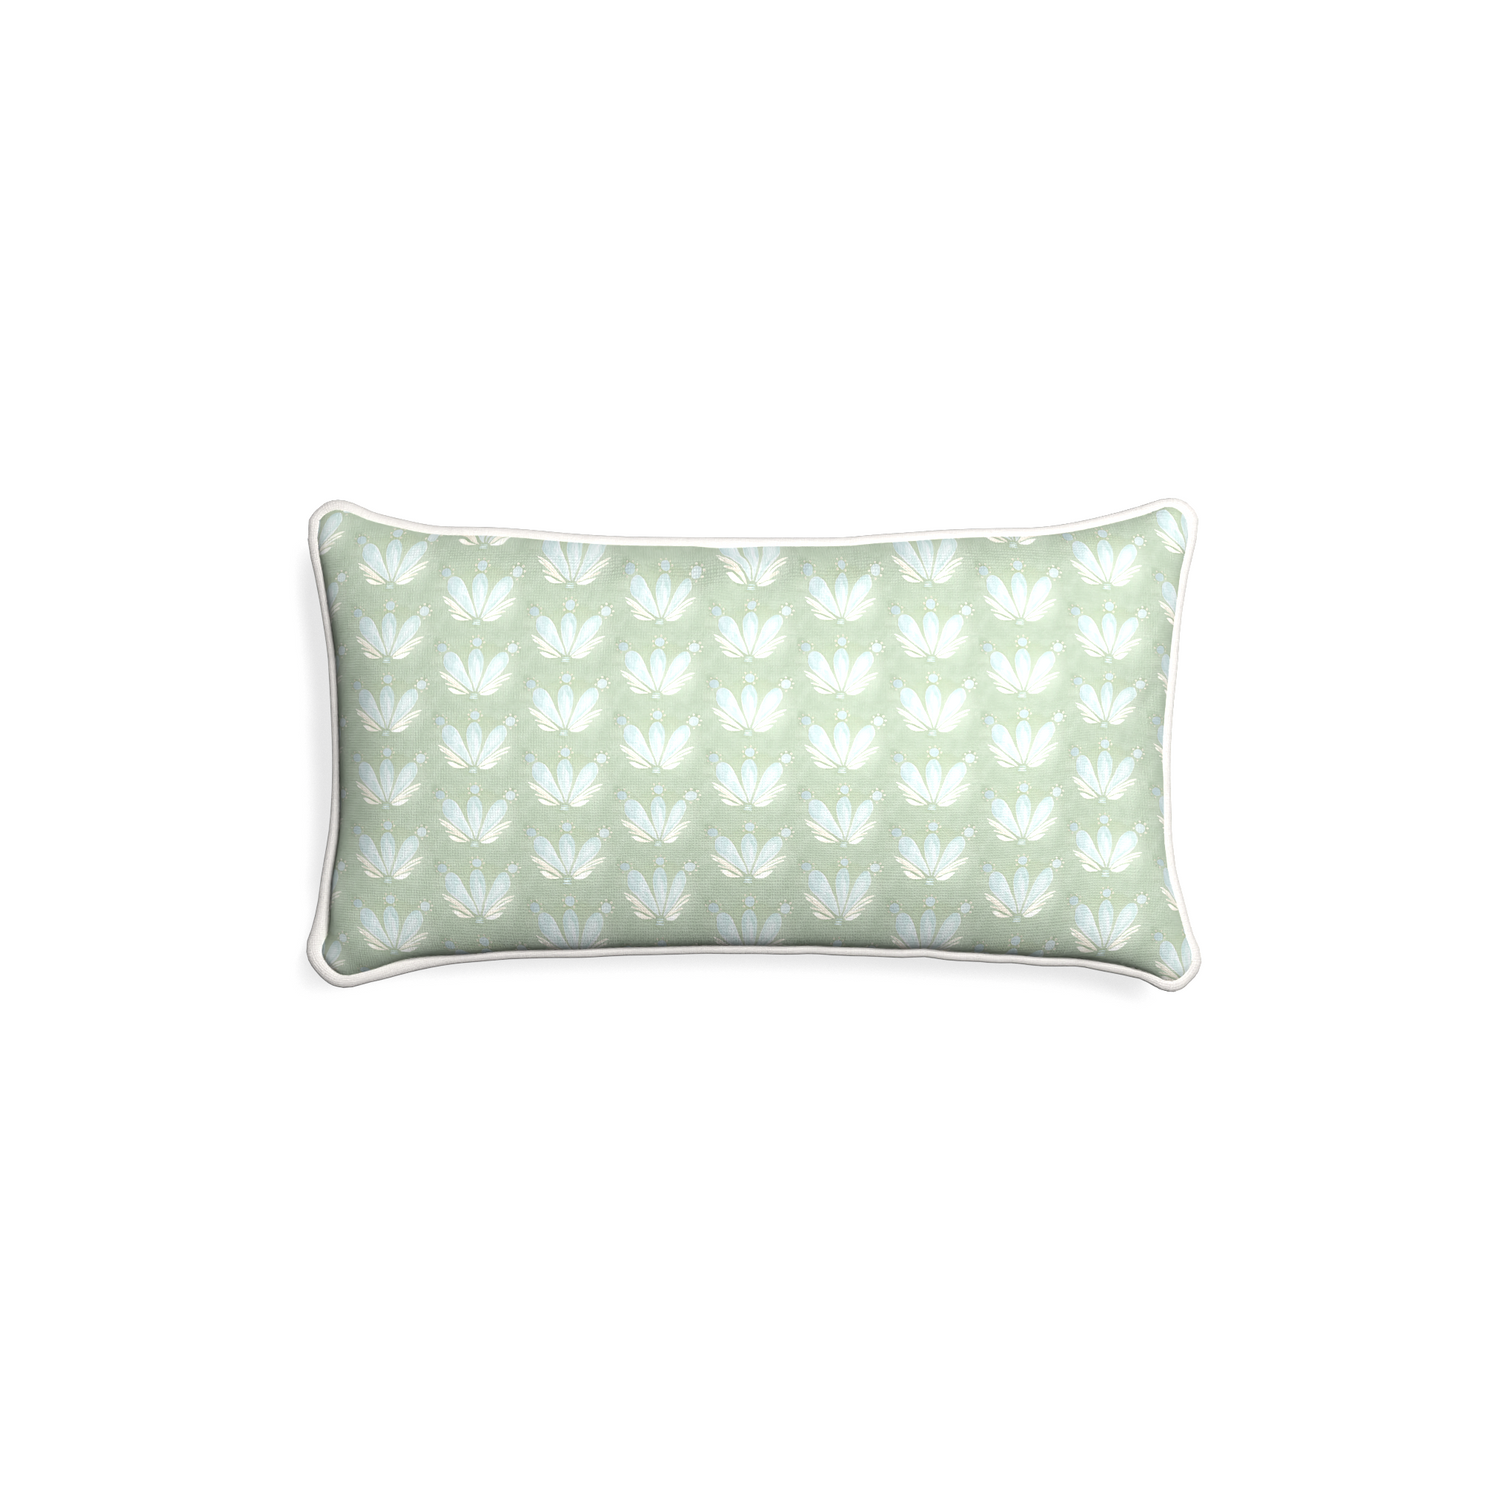 Petite-lumbar serena sea salt custom blue & green floral drop repeatpillow with snow piping on white background